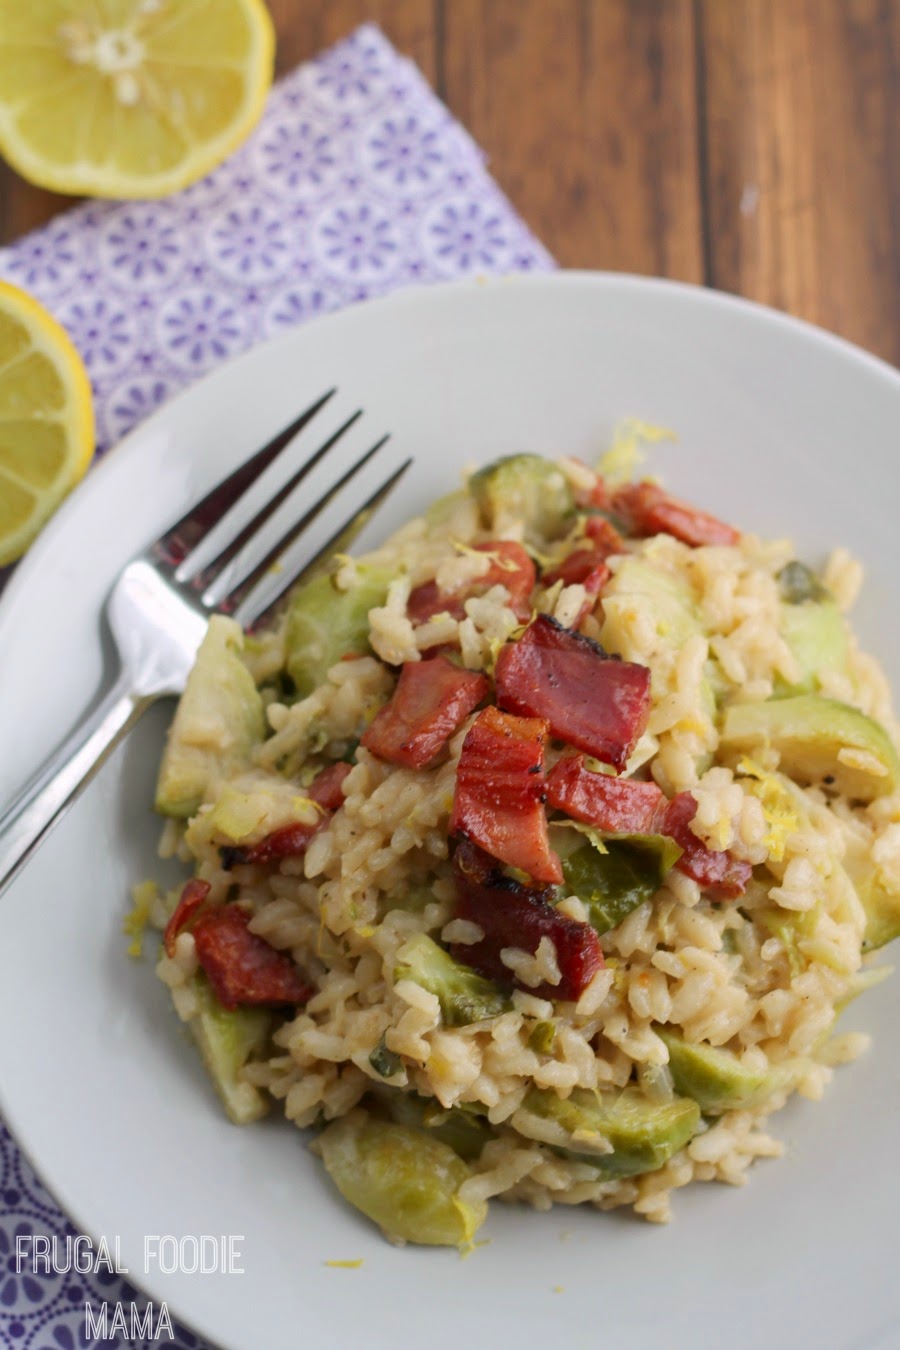 Bright lemon, fresh Brussels sprouts, crispy ham, and creamy arborio rice come together in this perfect for spring Lemon Risotto with Brussels Sprouts & Crispy Ham.